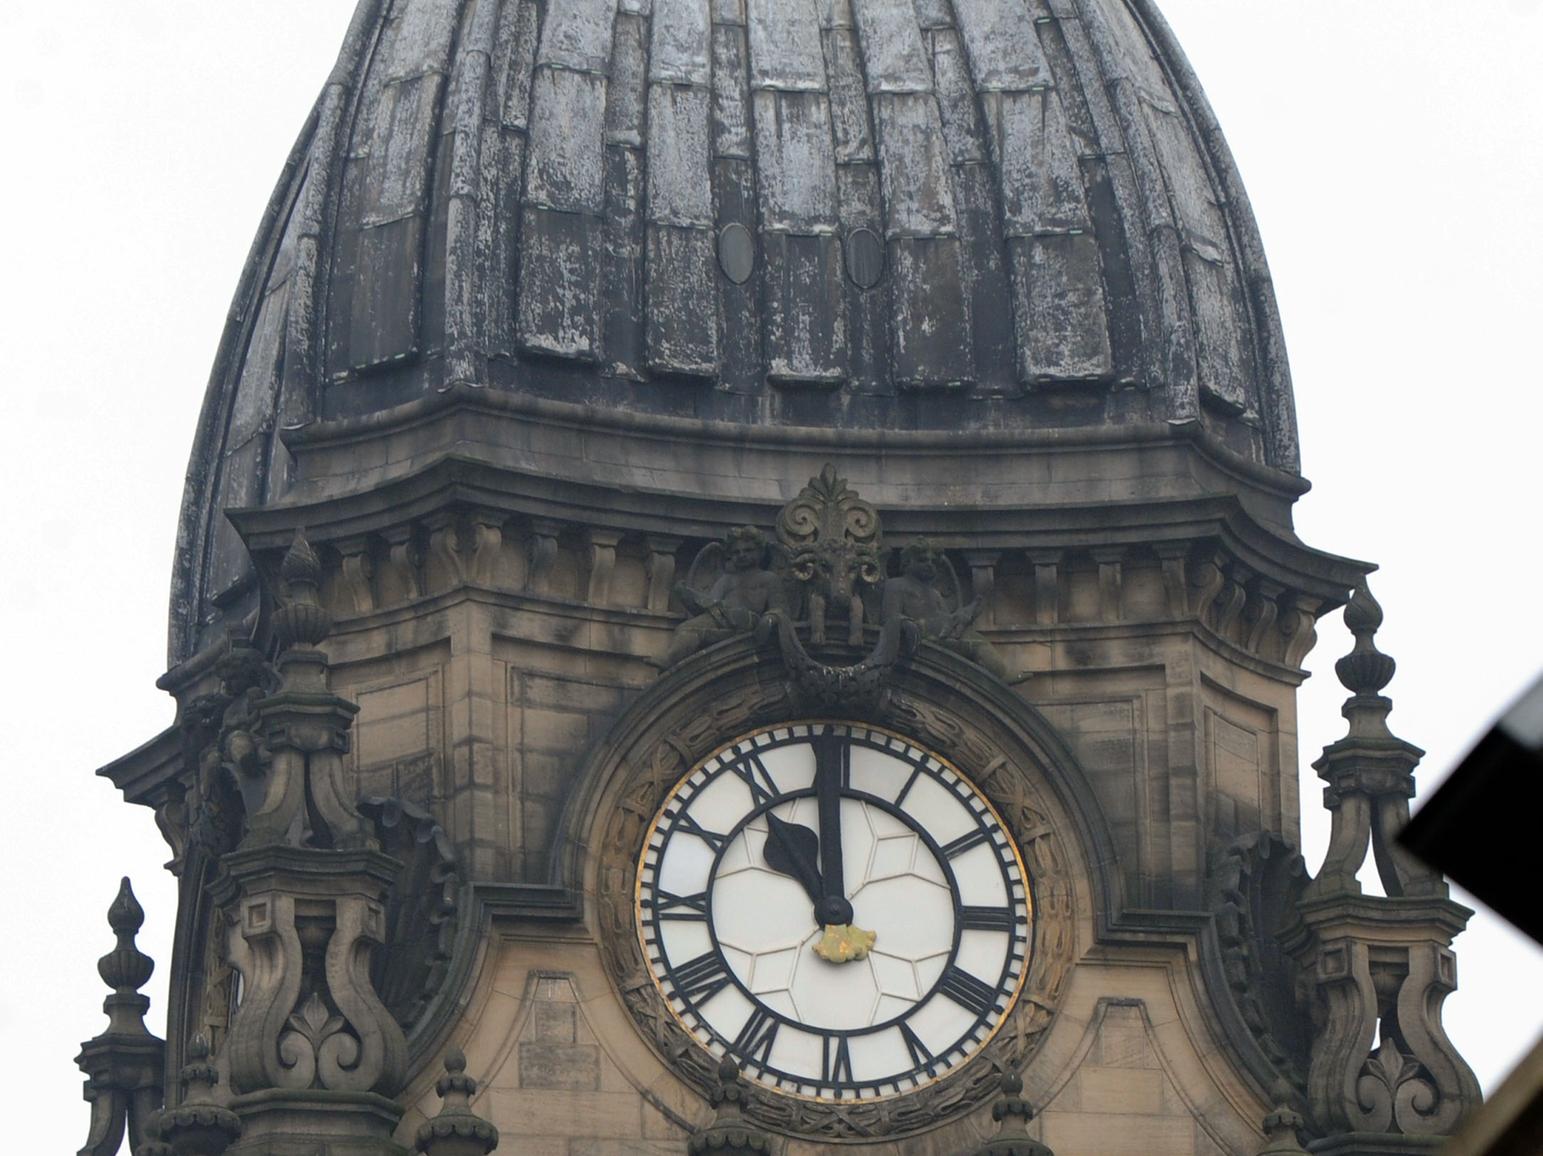 Leeds Town Hall is said to be haunted by the ghost of Mary Blythe, who threw herself from the clock tower in 1876. Legend has it that the clock doesnt strike at midnight so the ghost doesnt wake up.